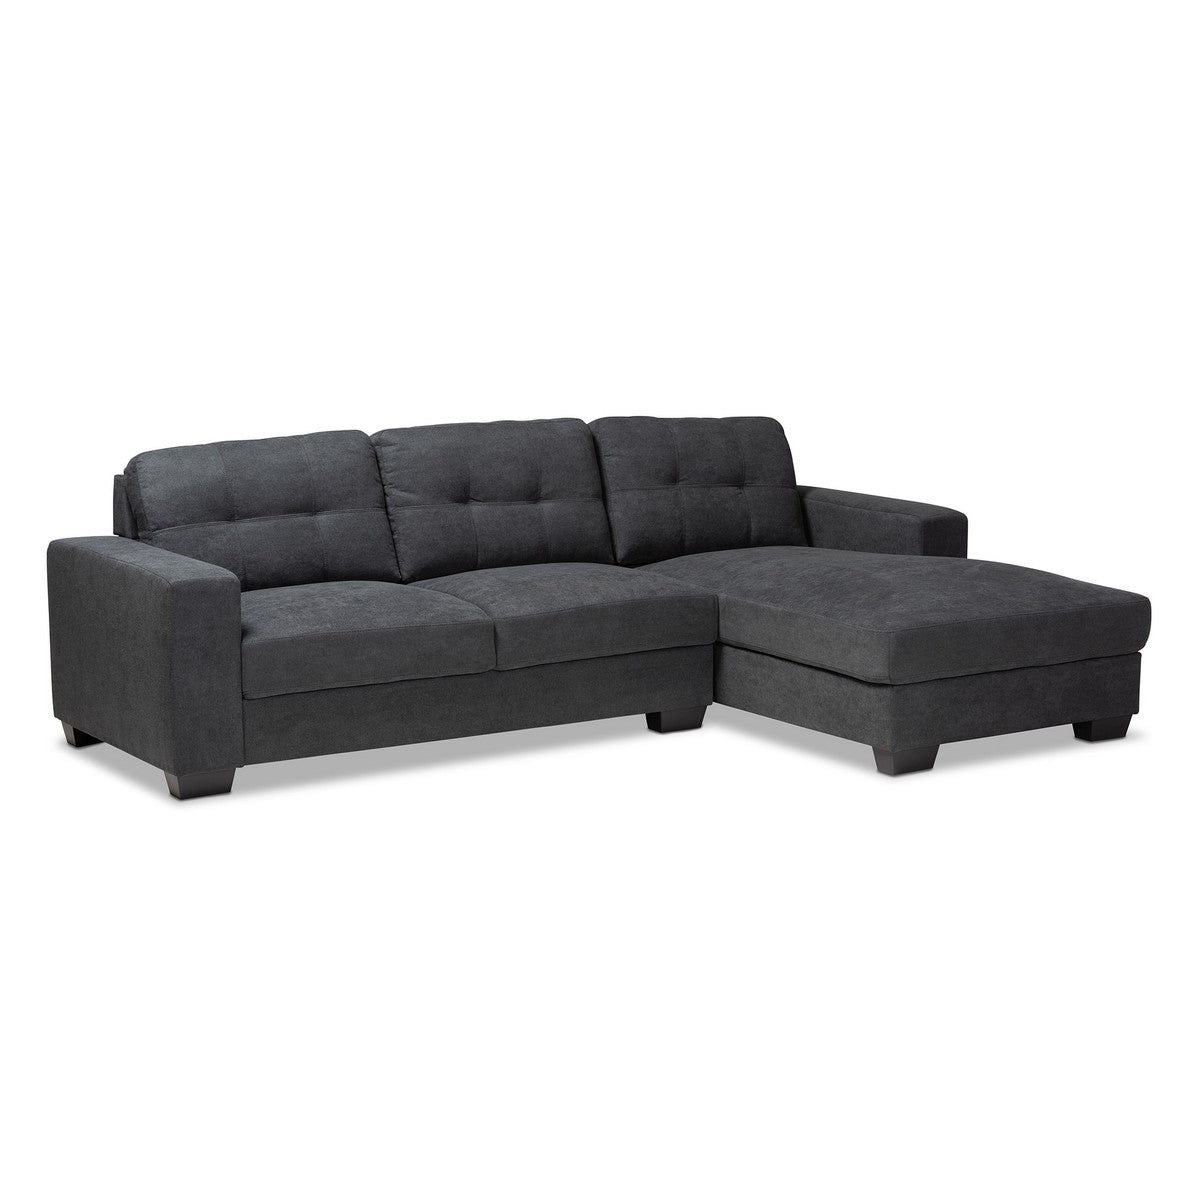 Baxton Studio Langley Modern and Contemporary Dark Grey Fabric Upholstered Sectional Sofa with Right Facing Chaise Baxton Studio-sectionals-Minimal And Modern - 1